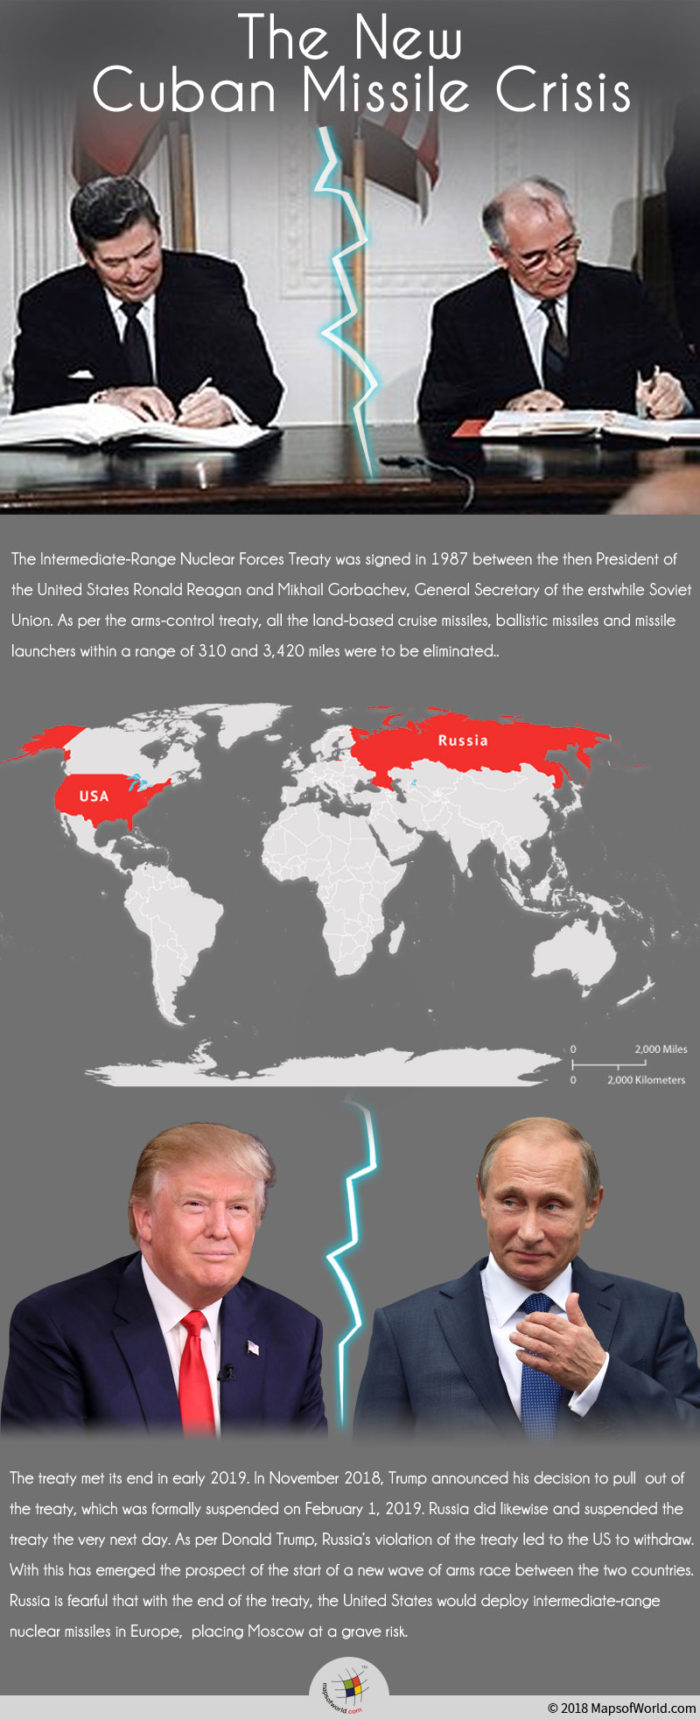 Infographic Giving Details on The New Cuban Missile Crisis